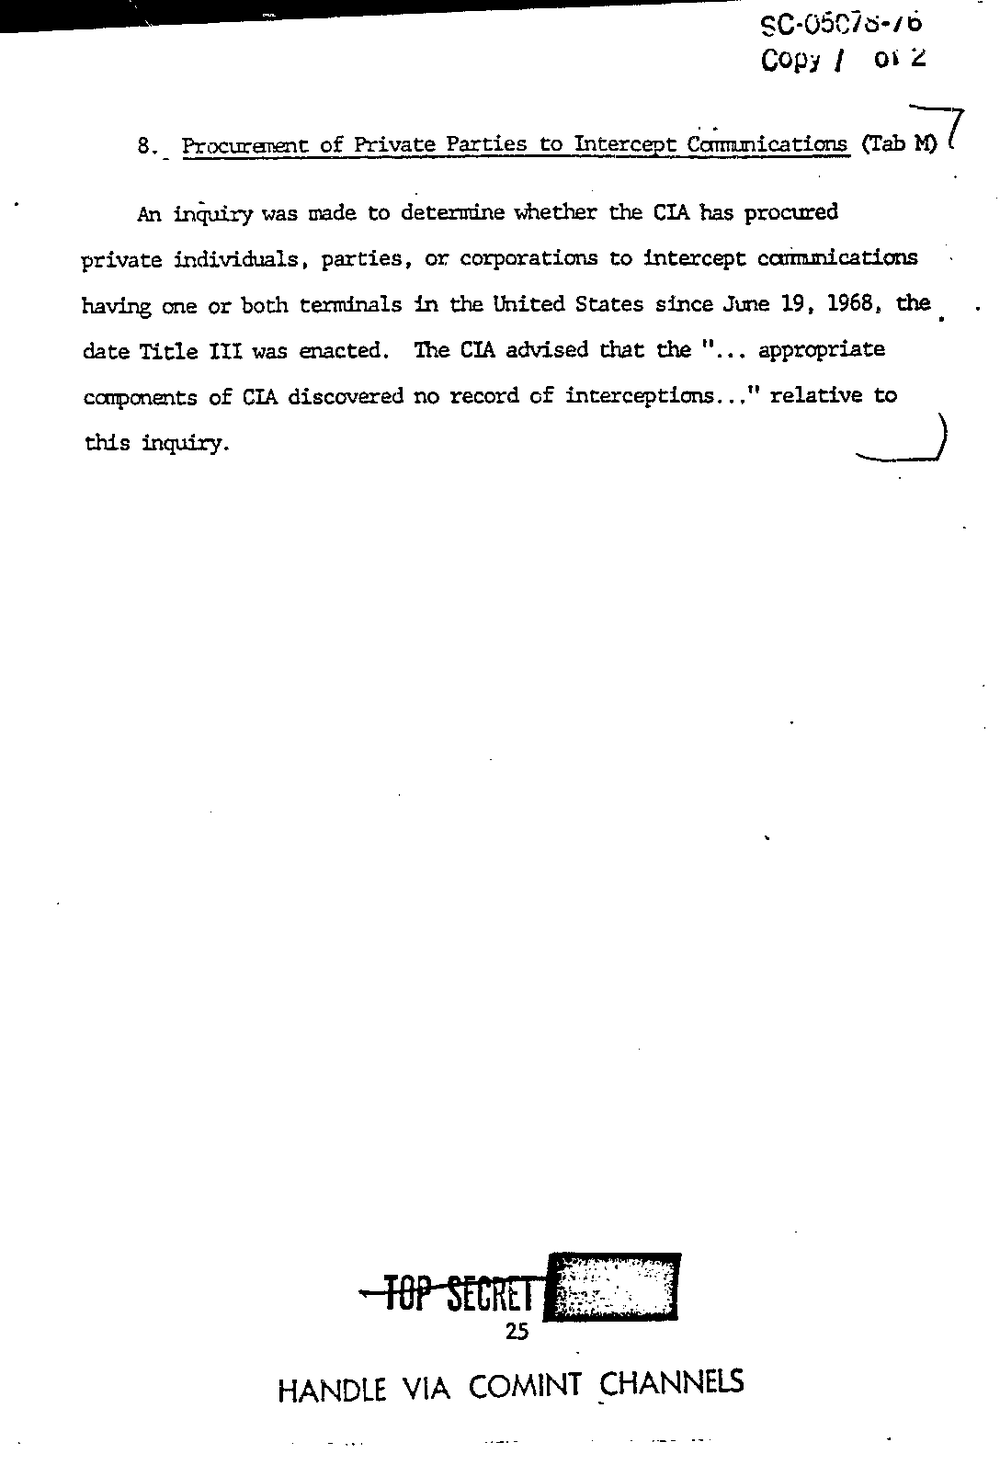 Page 33 from Report on Inquiry Into CIA Related Electronic Surveillance Activities